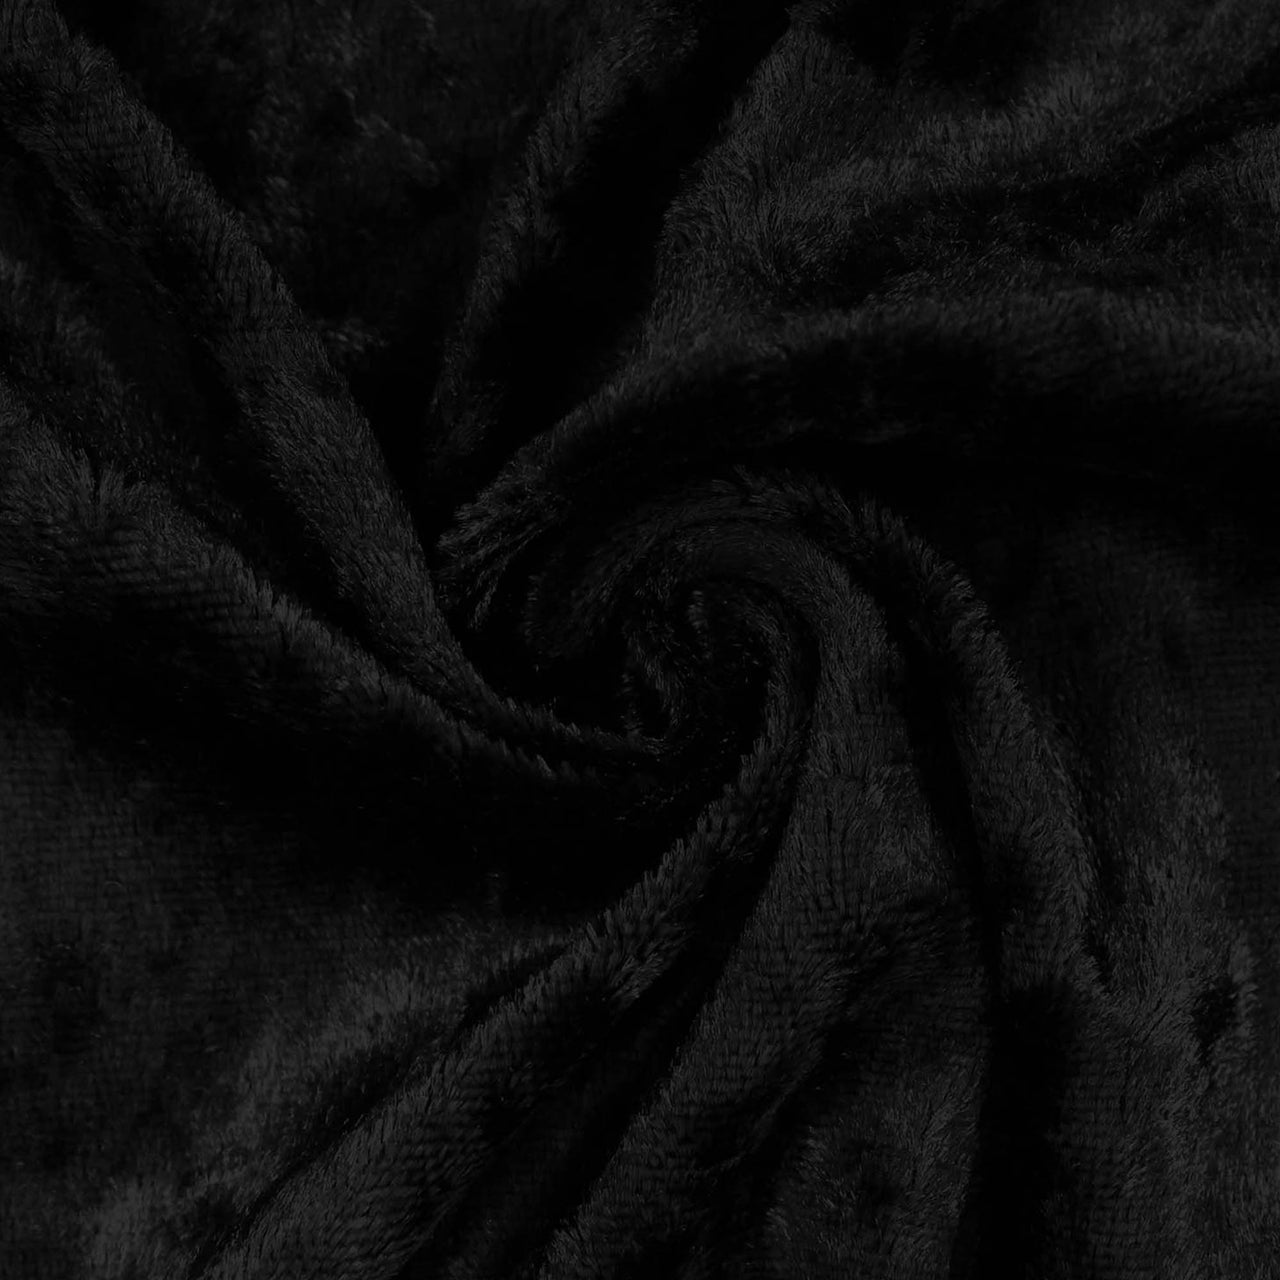 Black - Crushed Velvet Velour Fabric - Natural One Way Stretch For Costumes & Drapes